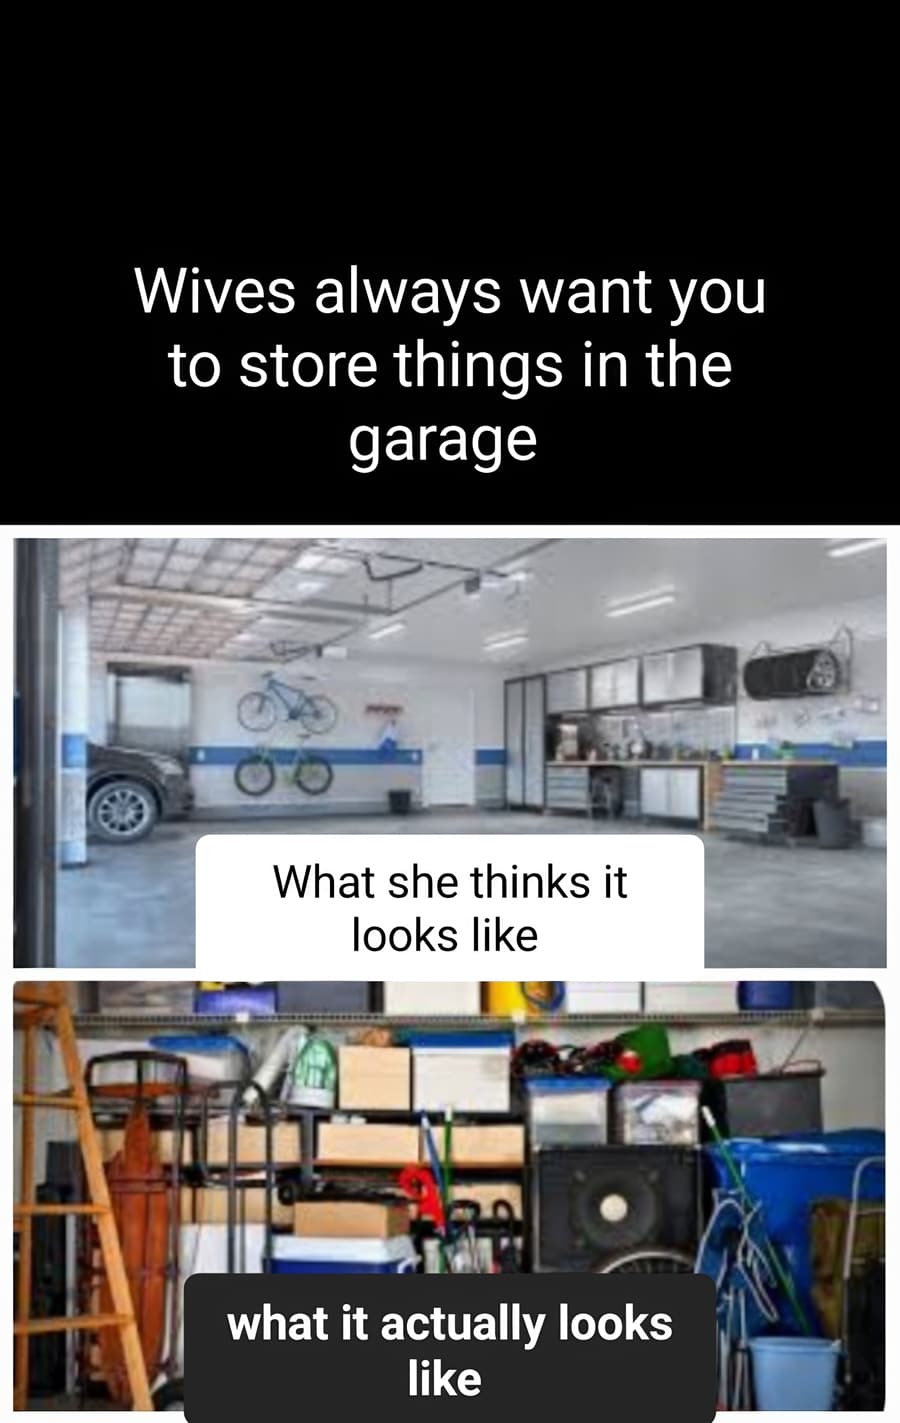 The wife wants things in the garage